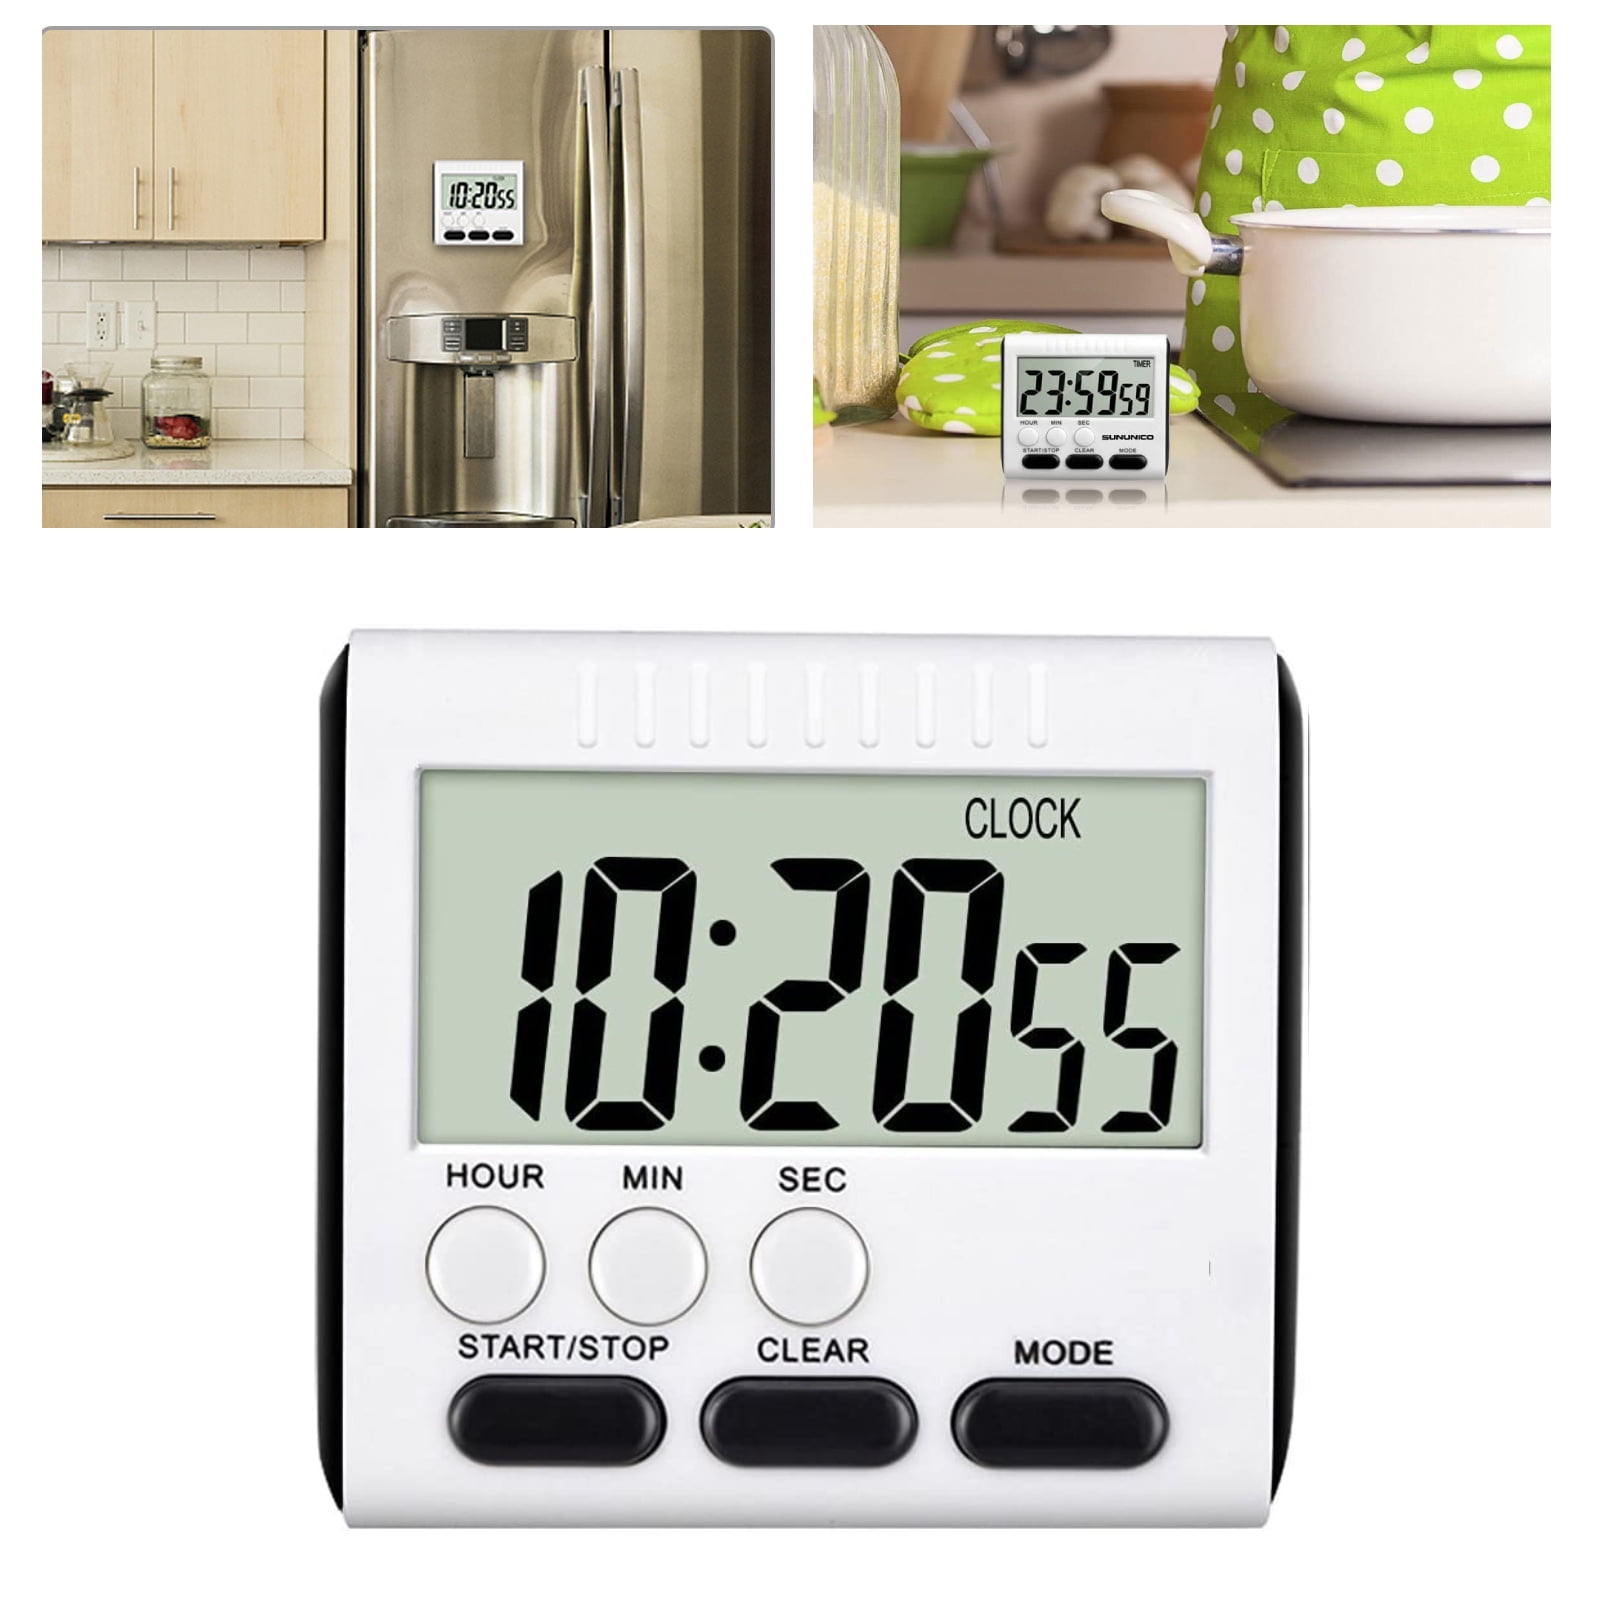 Large Display Cooking Timer 12-Hour Display Clock Memory Function Loud Alarm Strong Magnet Back Count-Up & Count Down for Cooking Baking Sports Games Office Digital Kitchen Timer 